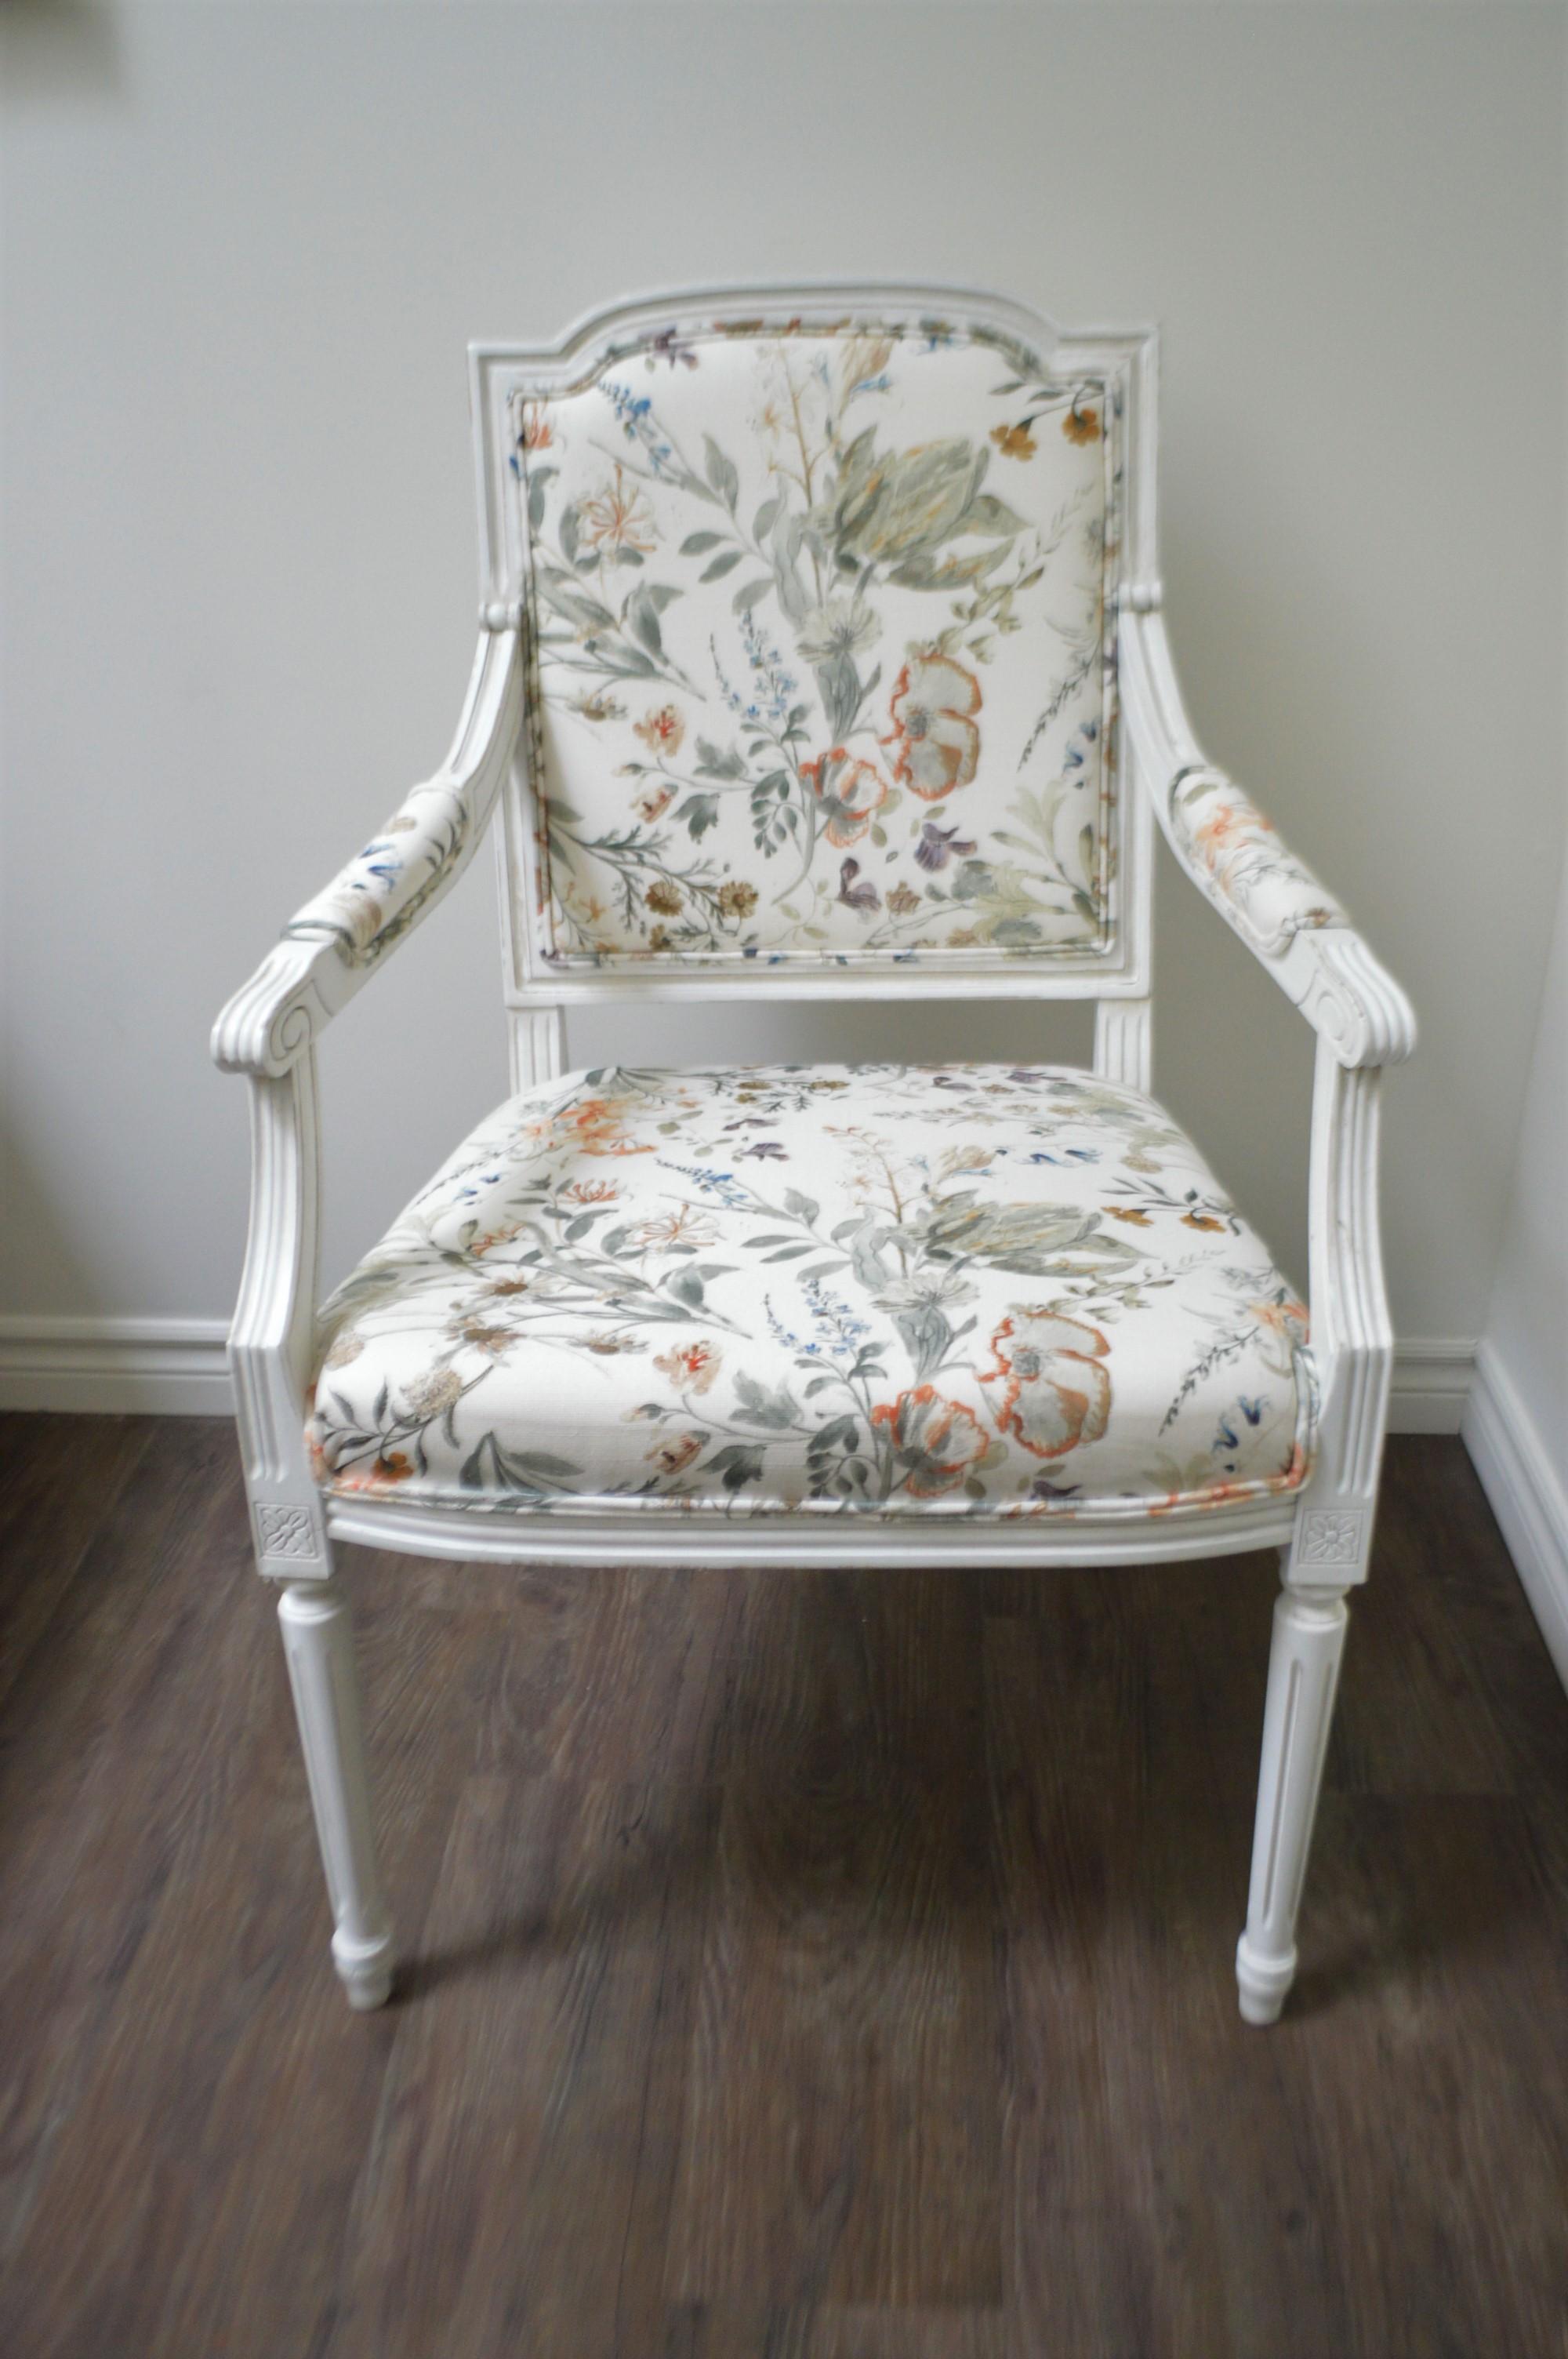 Pair of Louis XVI style, paint white and a light distress finish. The fabric is very fresh, white background floral in light and dark grey, apricot and some dark blue.
The size of the armchairs is generous.